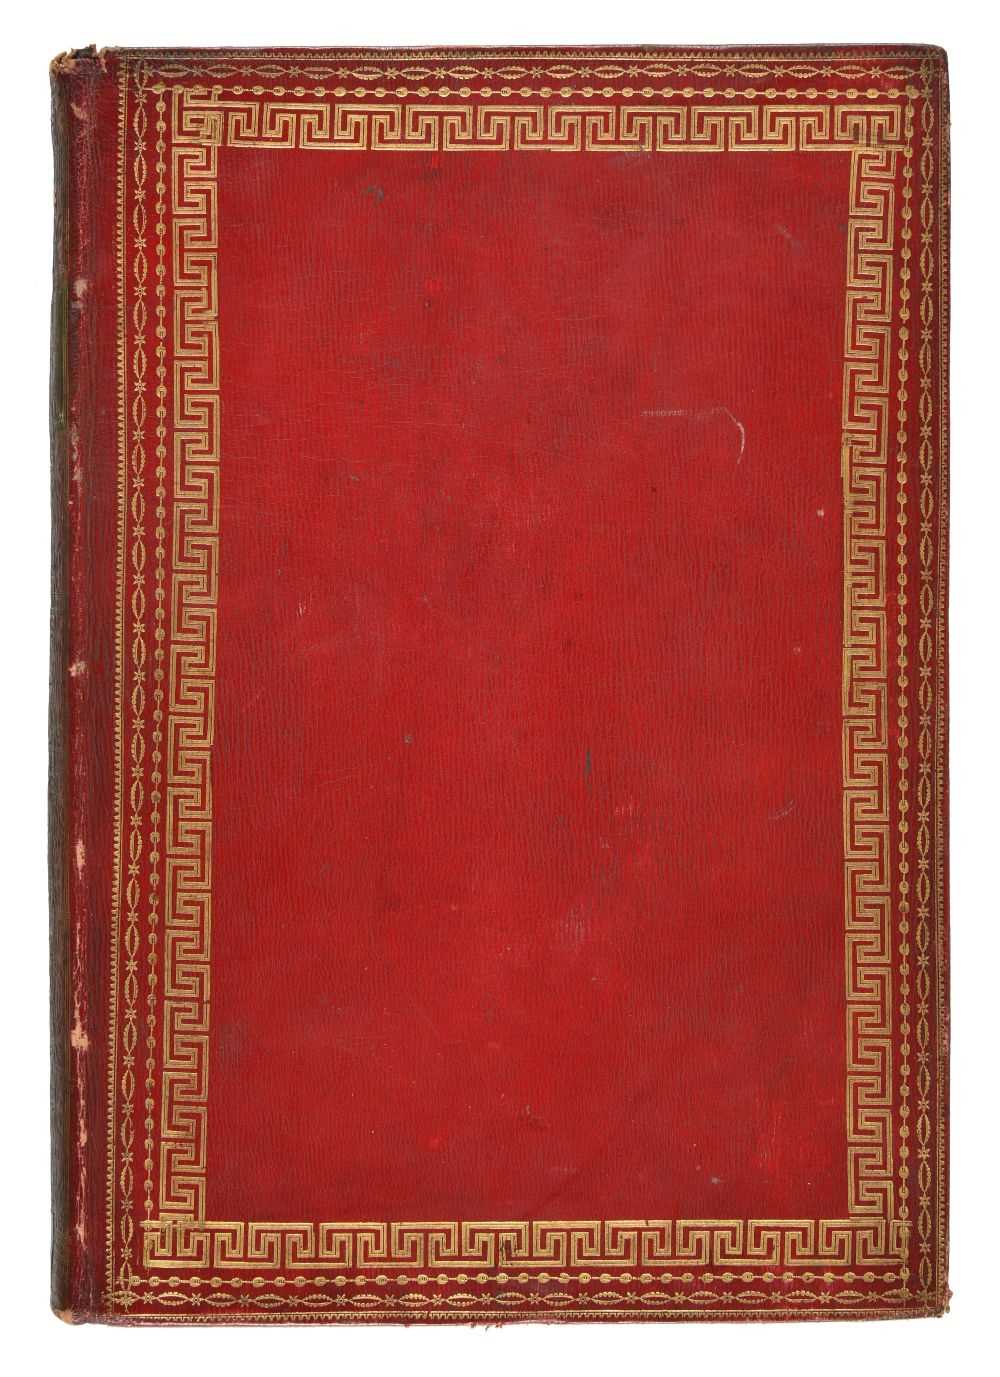 Lot 305 - Army Lists. A List of Officers of the Army, and Marines, 11 volumes, 1785-97